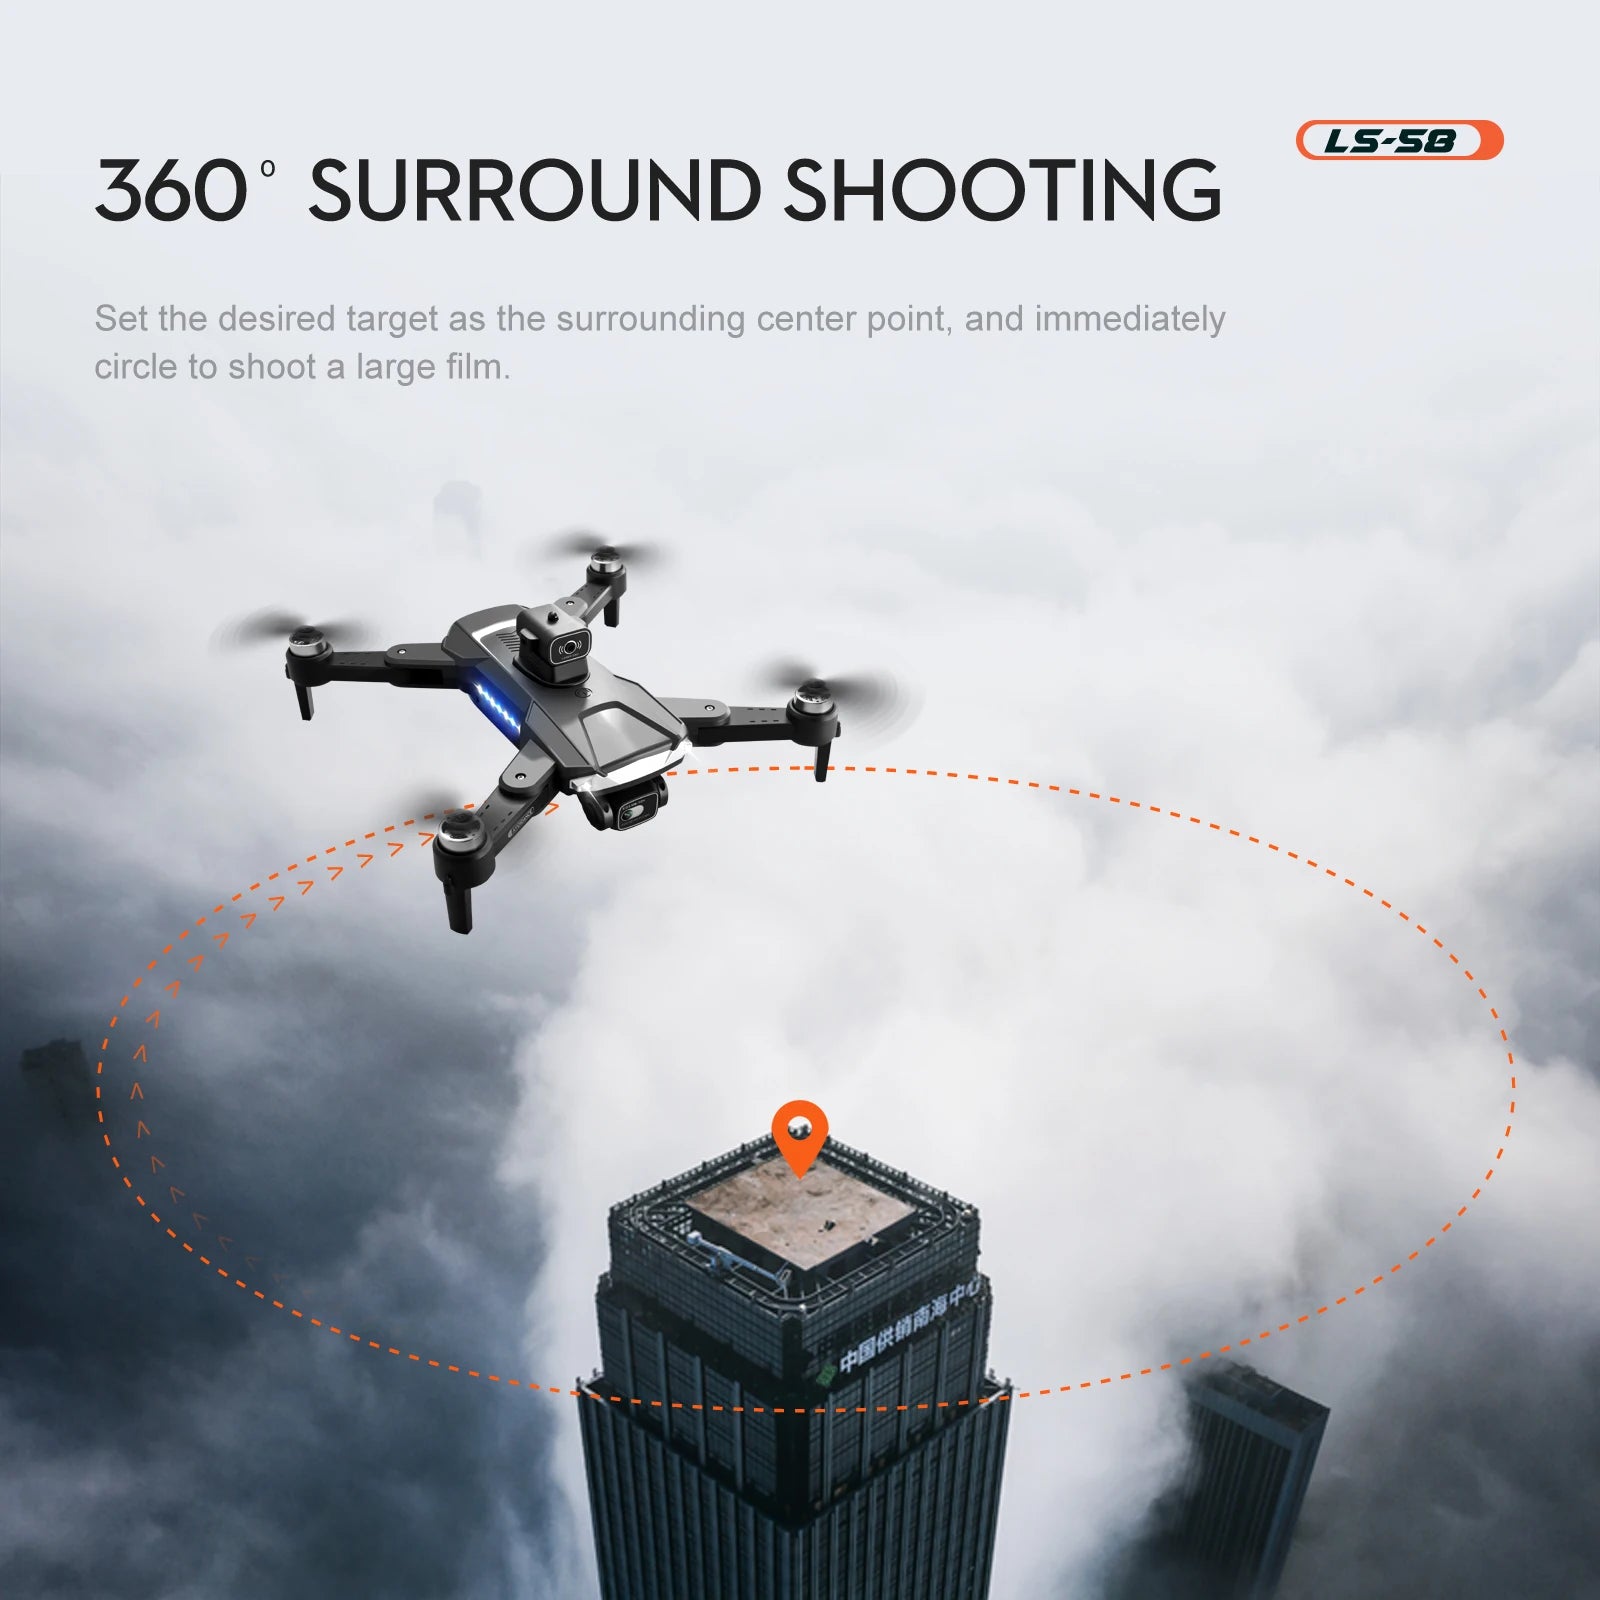 LS58 Drone, ls-5o 360 surround shooting set the desired target as the